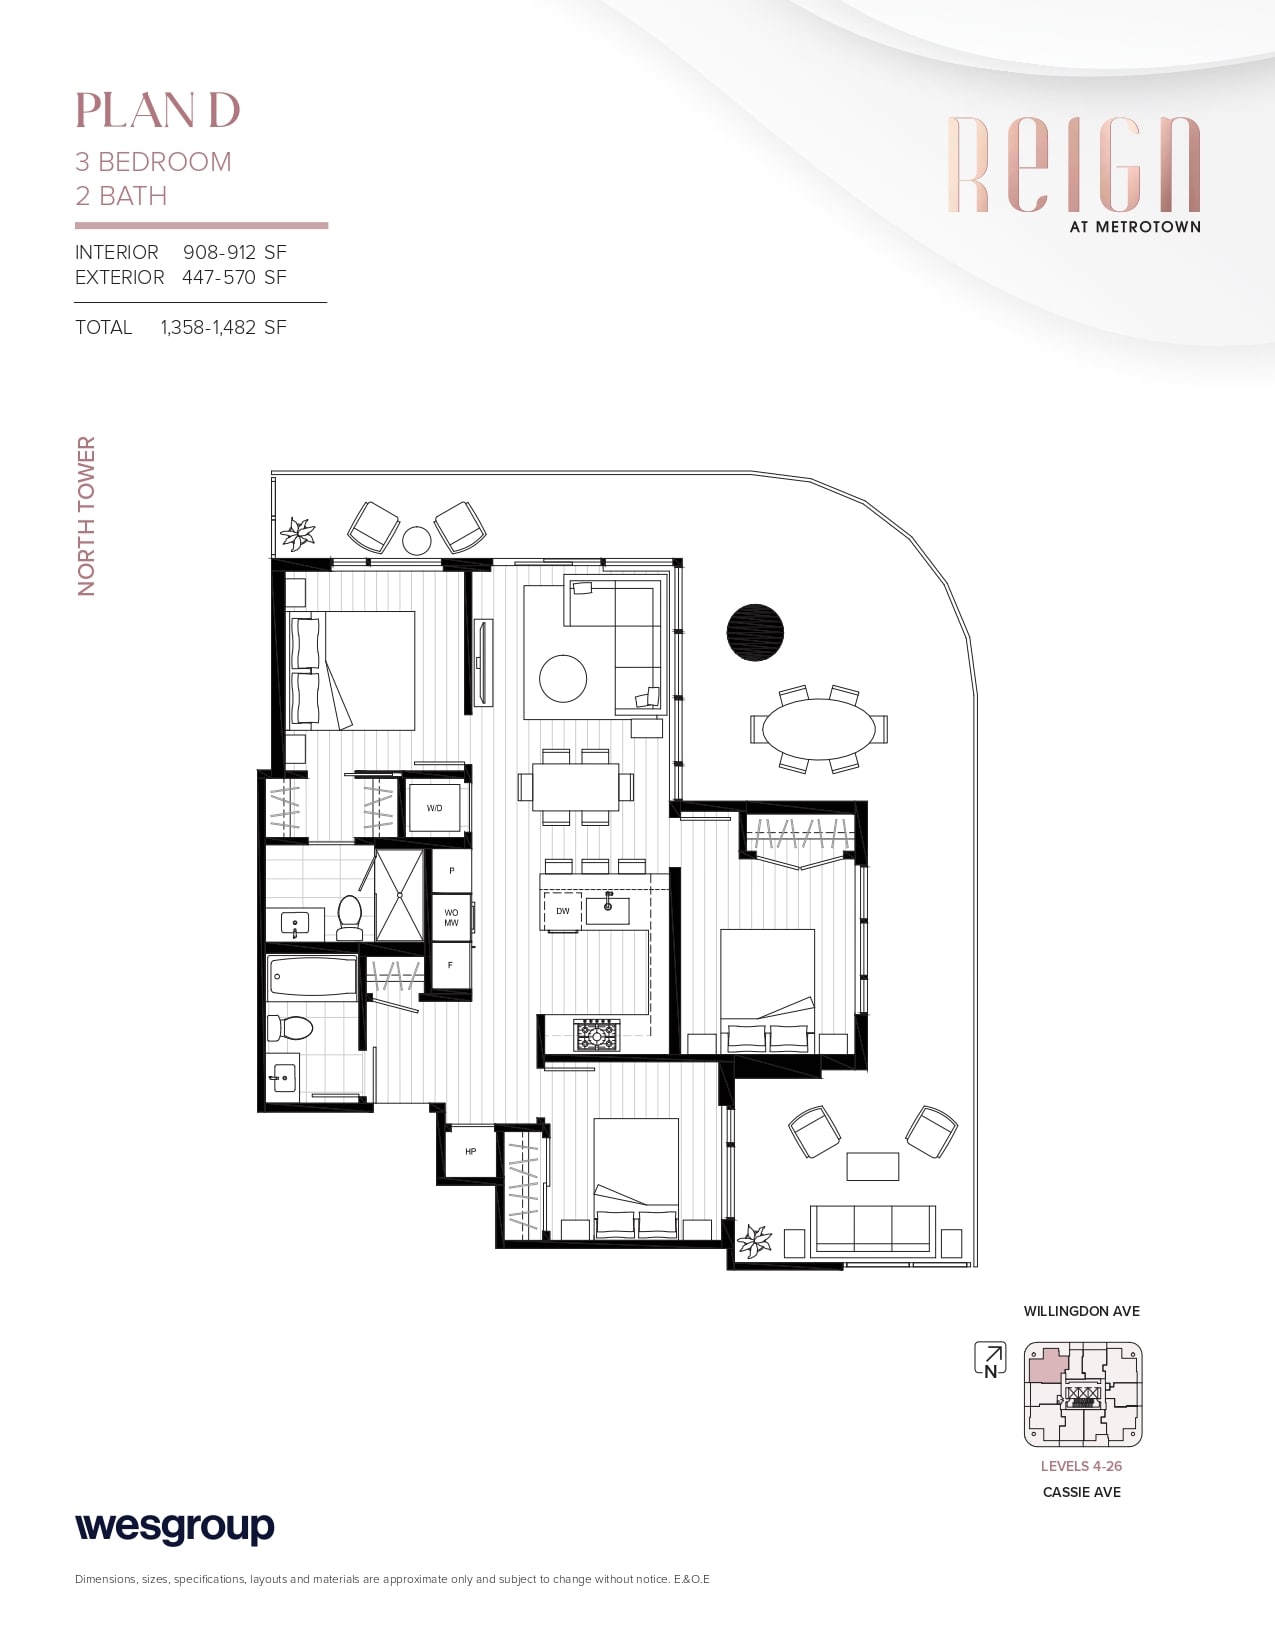 Reign_-_North_Tower_-_Typical_Floorplans_-_FINAL__page-0019-min.jpg